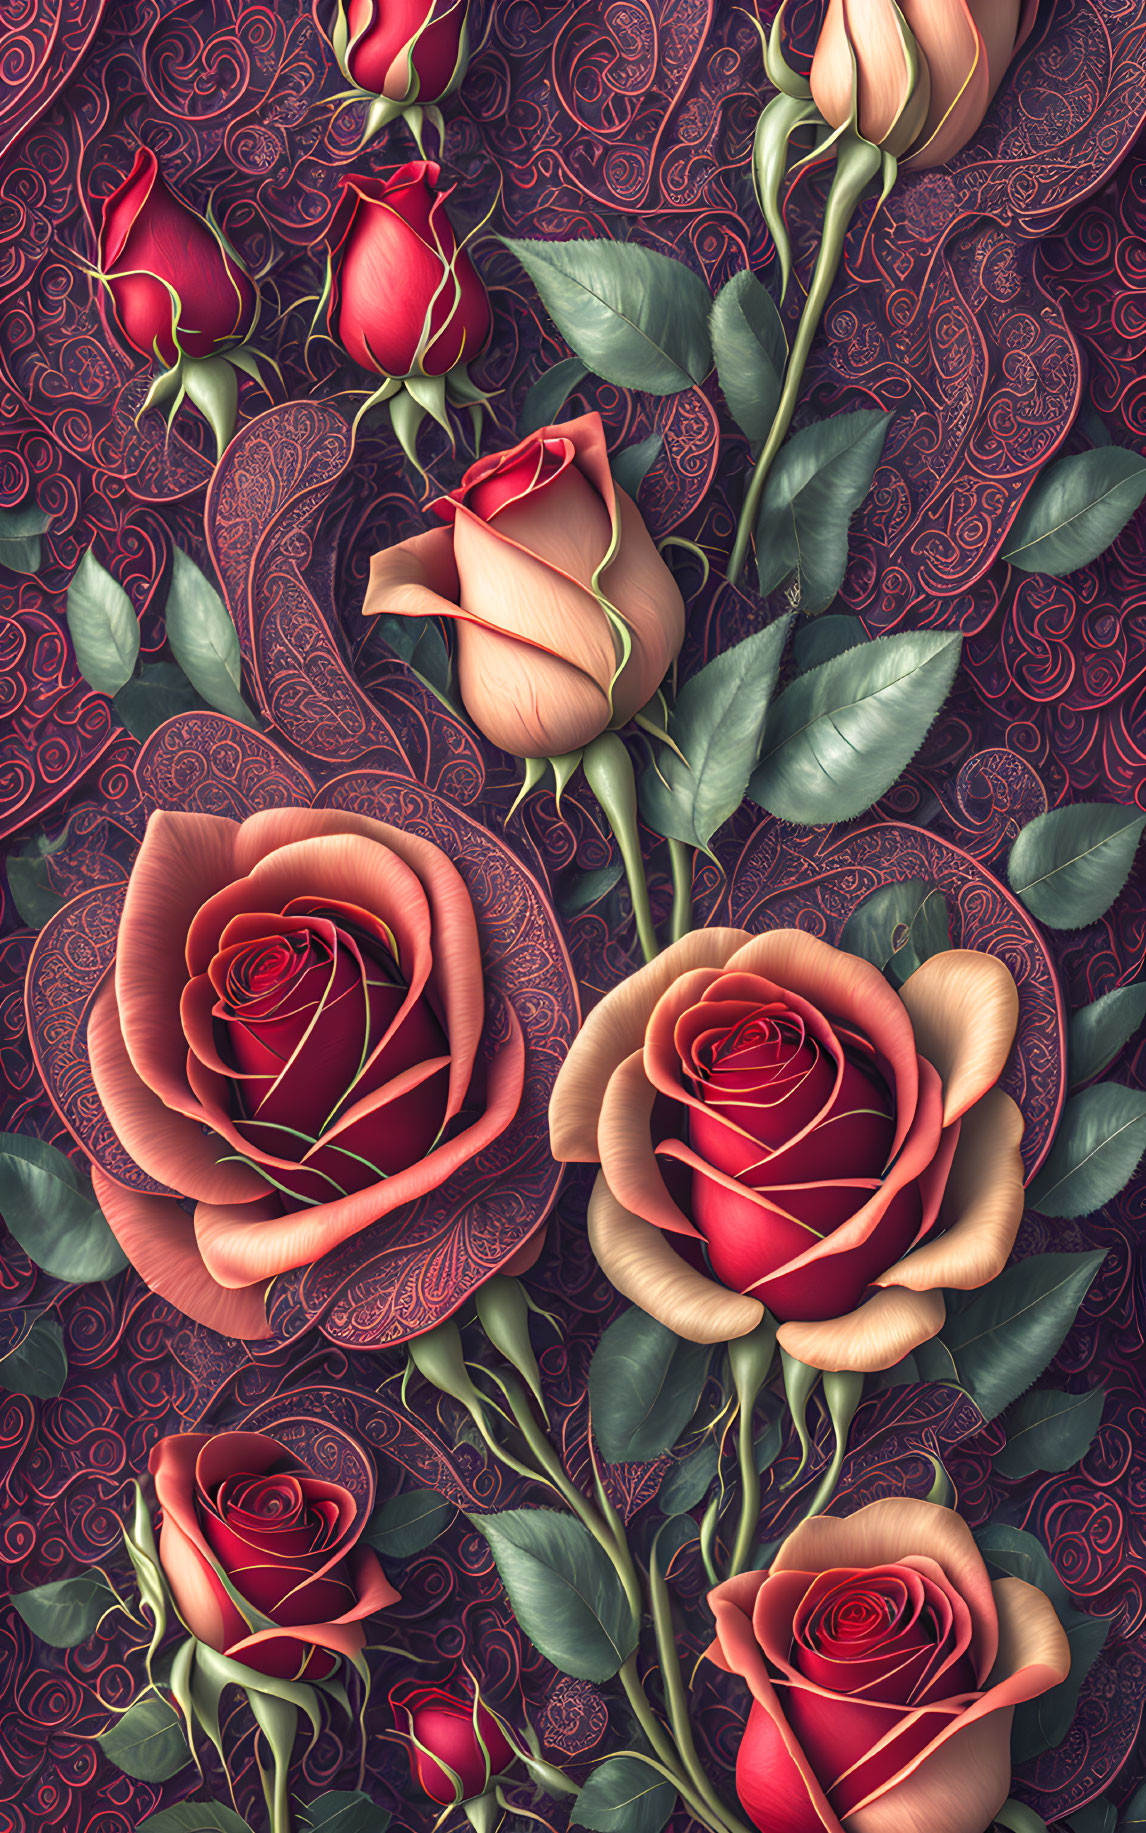 Vibrant red and peach roses with paisley patterns on dark background